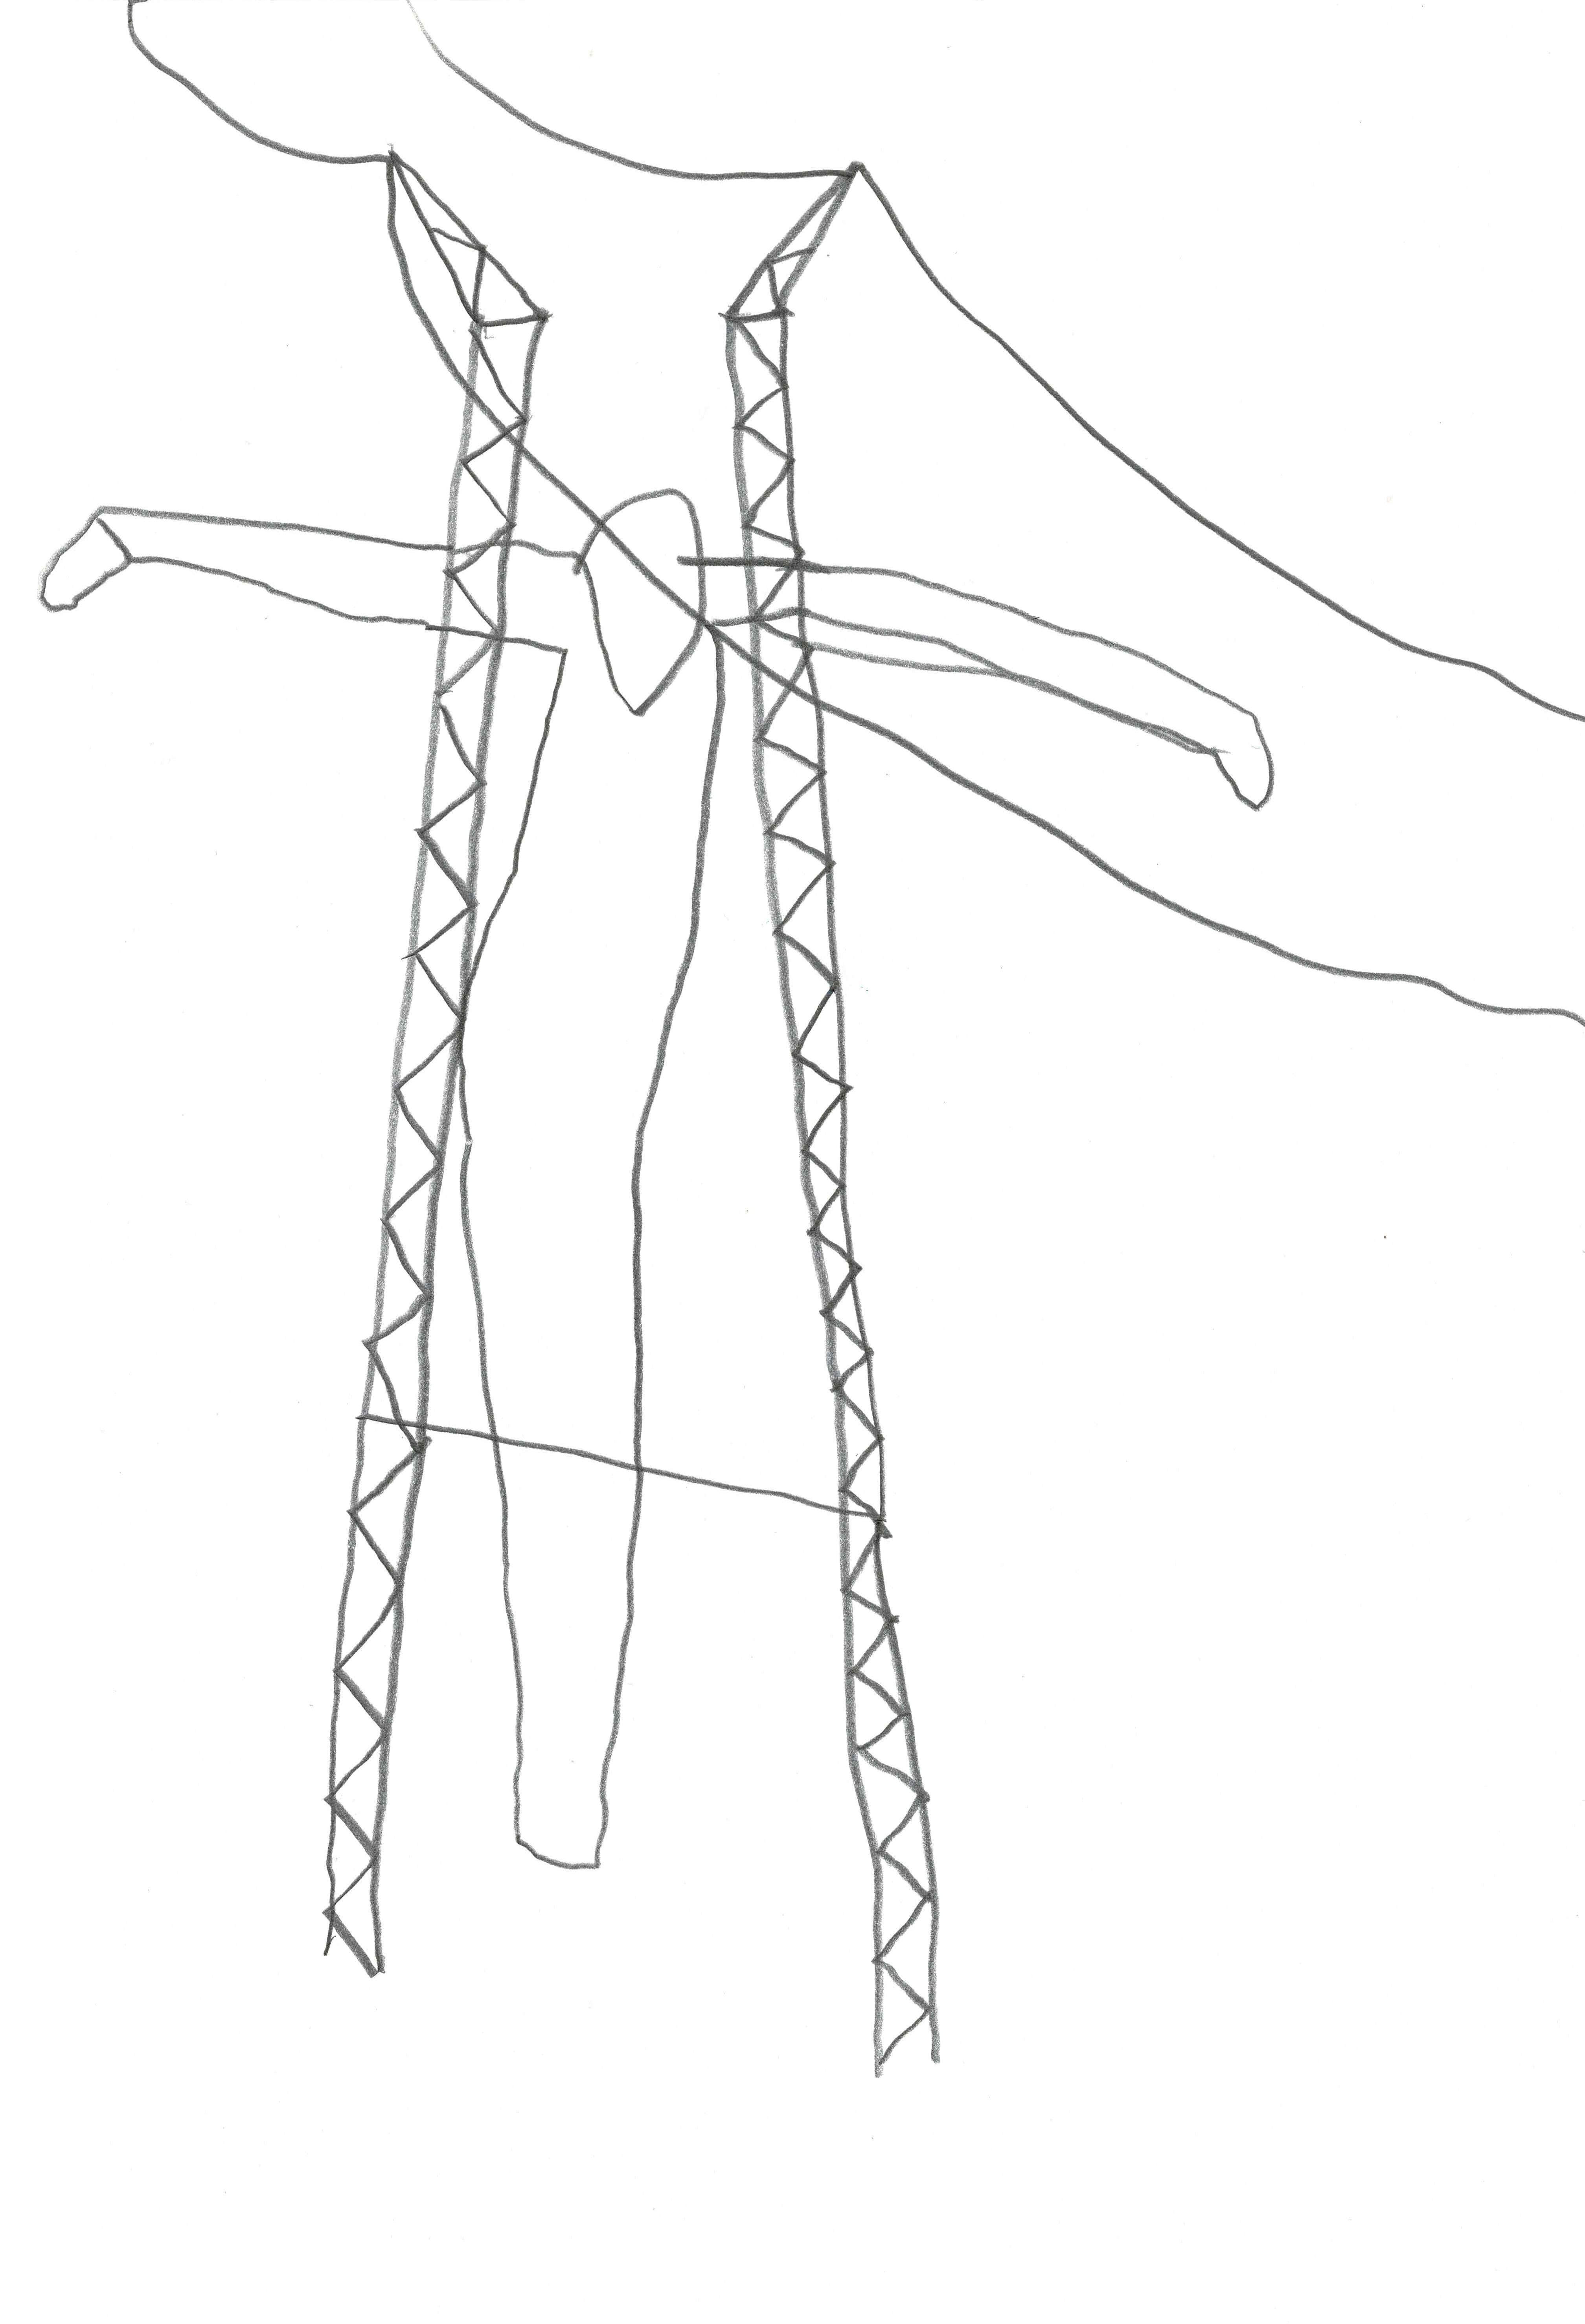 pencil drawing of a figure hanging like christ on an electric wire support